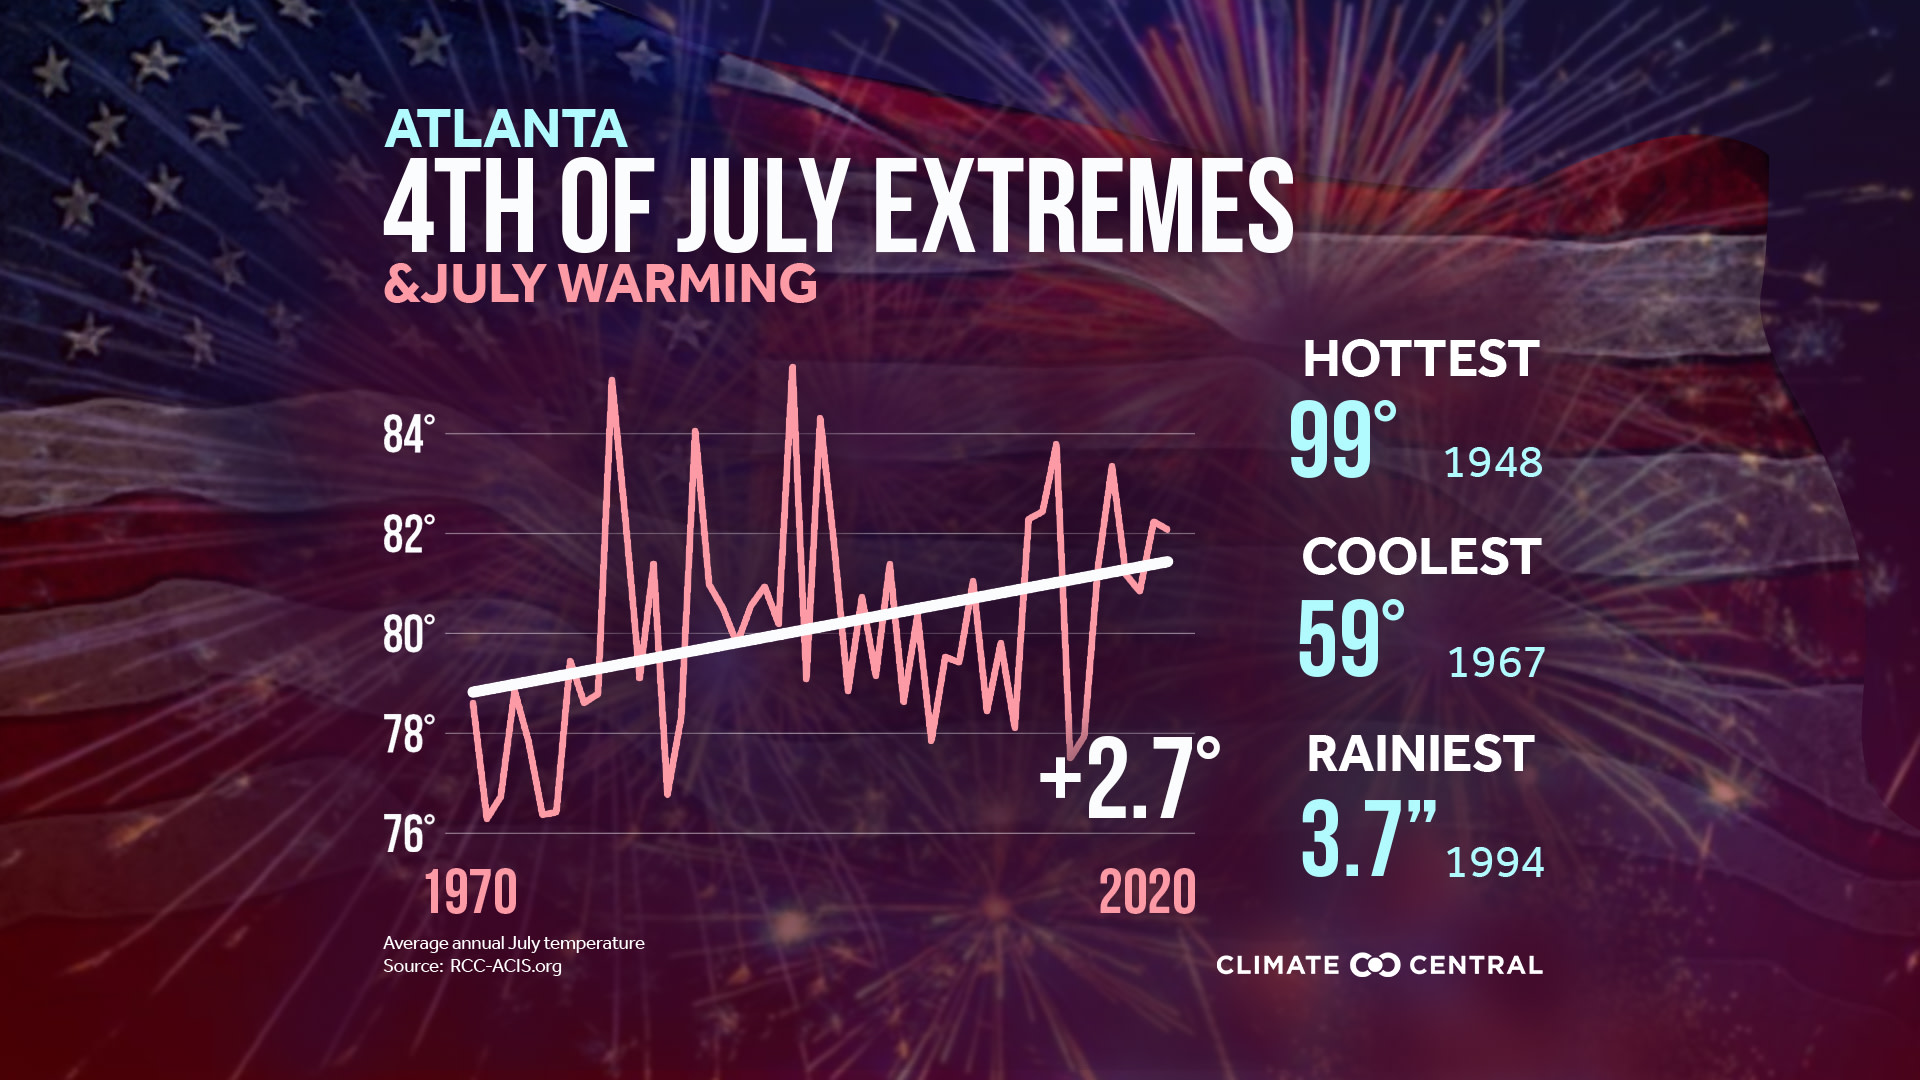 Local Extremes - July Warming & Extremes